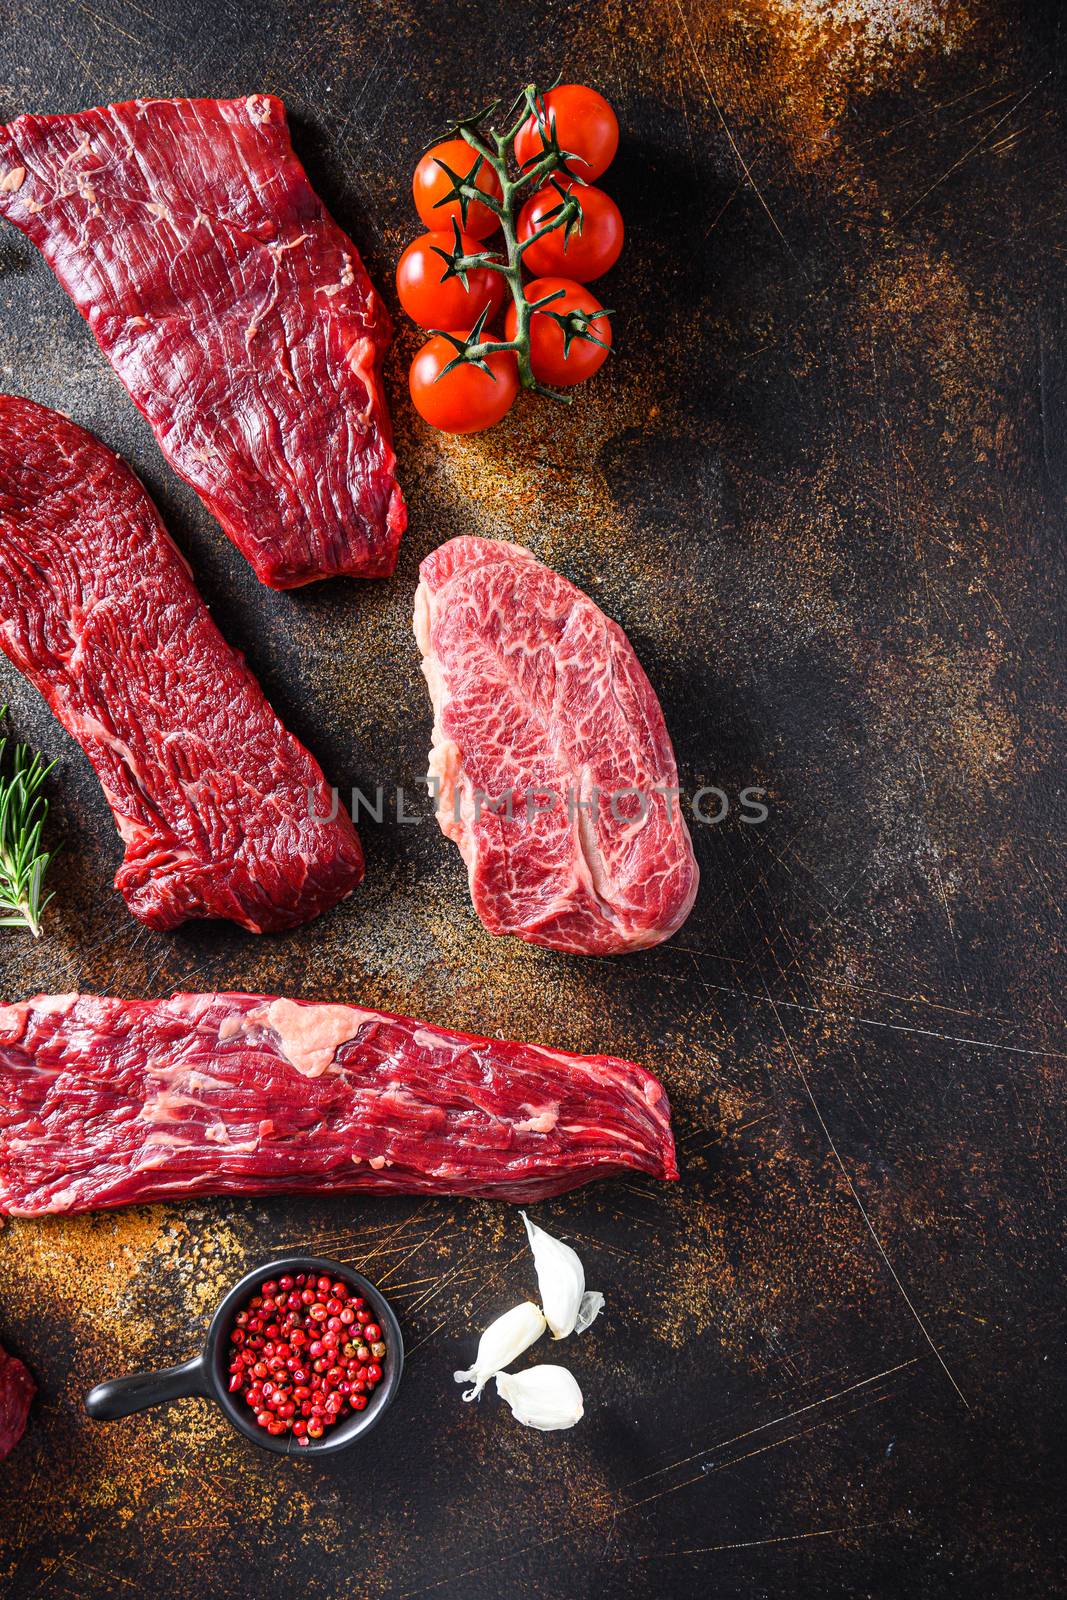 Organic set of raw alternative beef steaks flap flank Steak, machete steak or skirt cut, Top blade or flat iron beef and tri tip, triangle roast with denver cut side view over old rustic metal surface space for text on side.